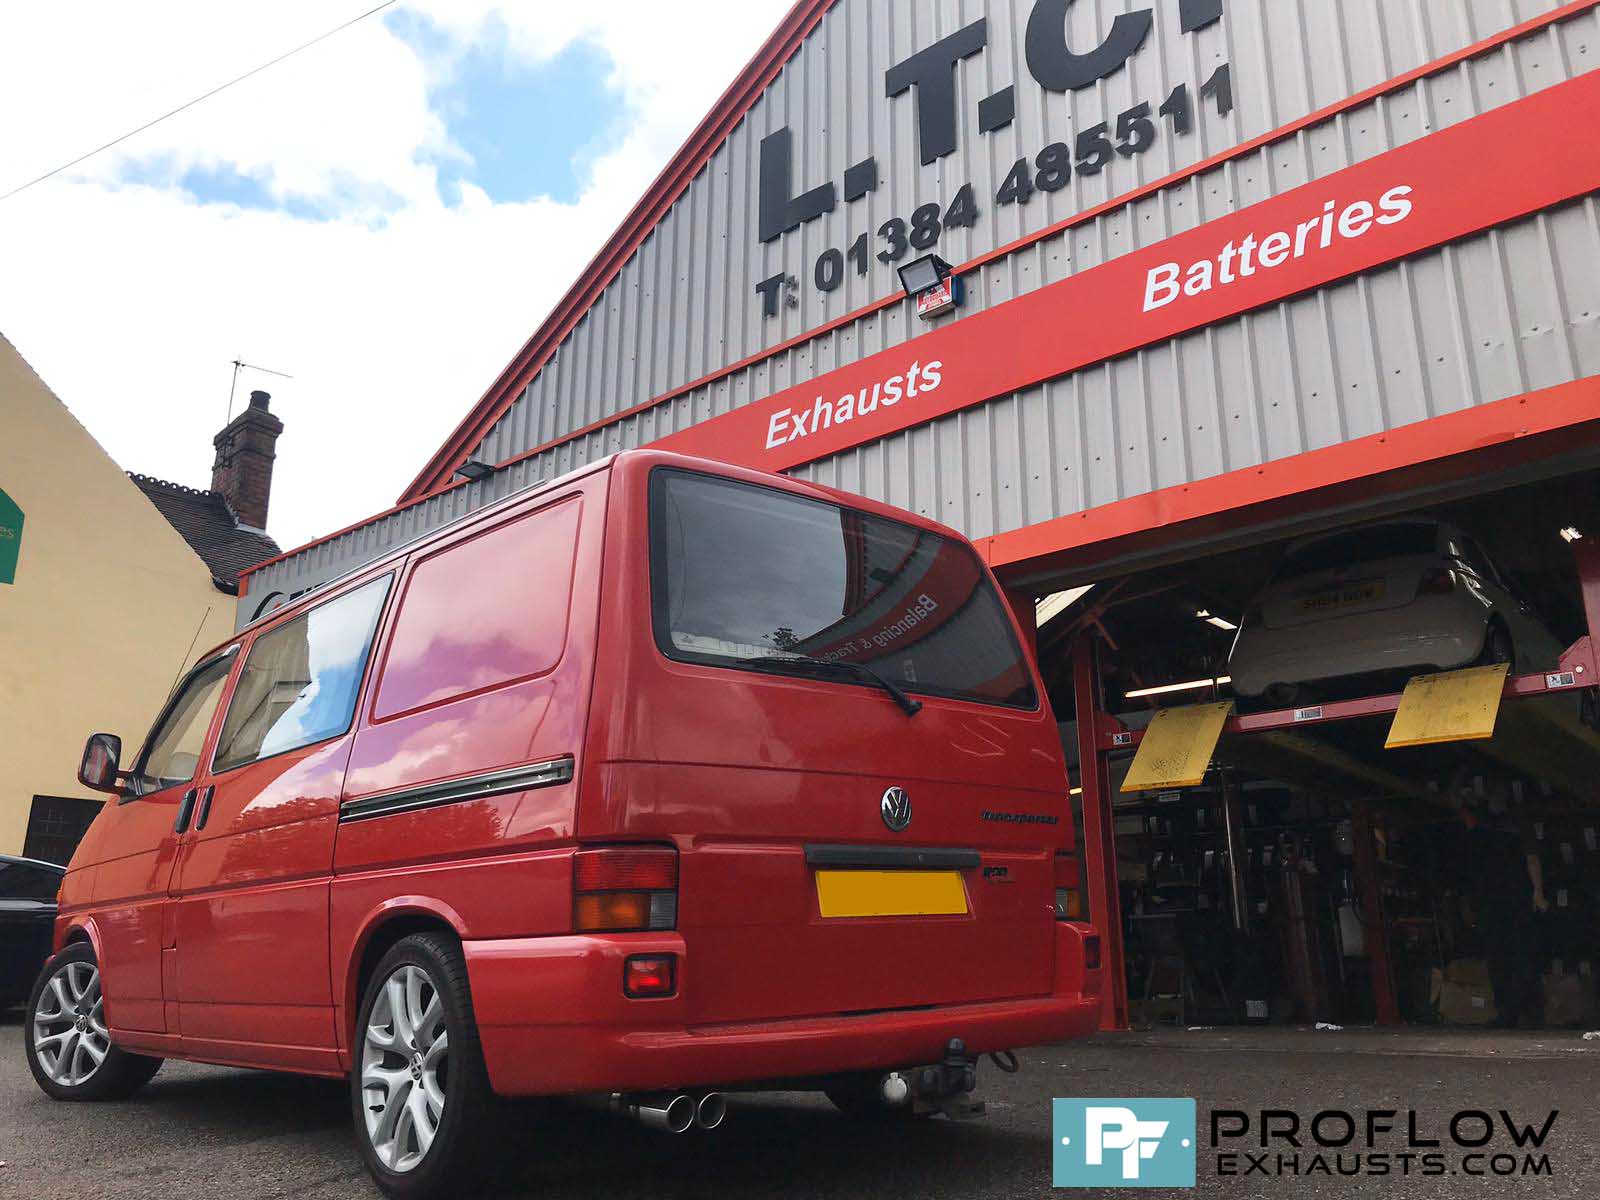 Proflow Custom built Exhaust for VW T4 Transporter Middle and Single Exit Rear